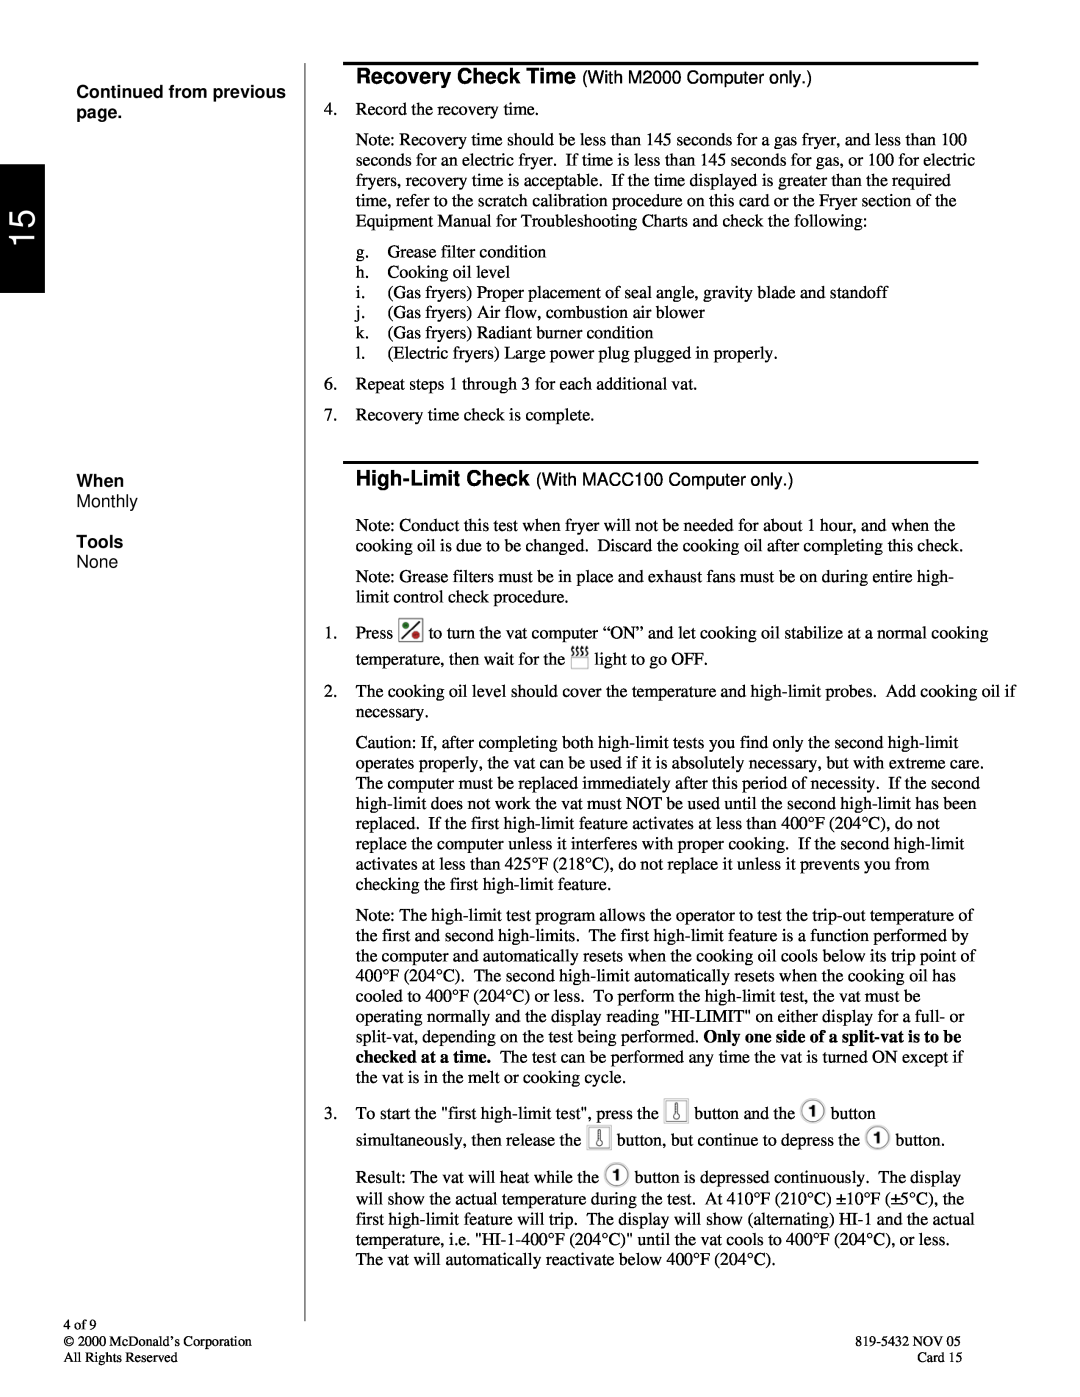 Frymaster 819-5432 manual Continued from previous page, When, Tools, Record the recovery time 